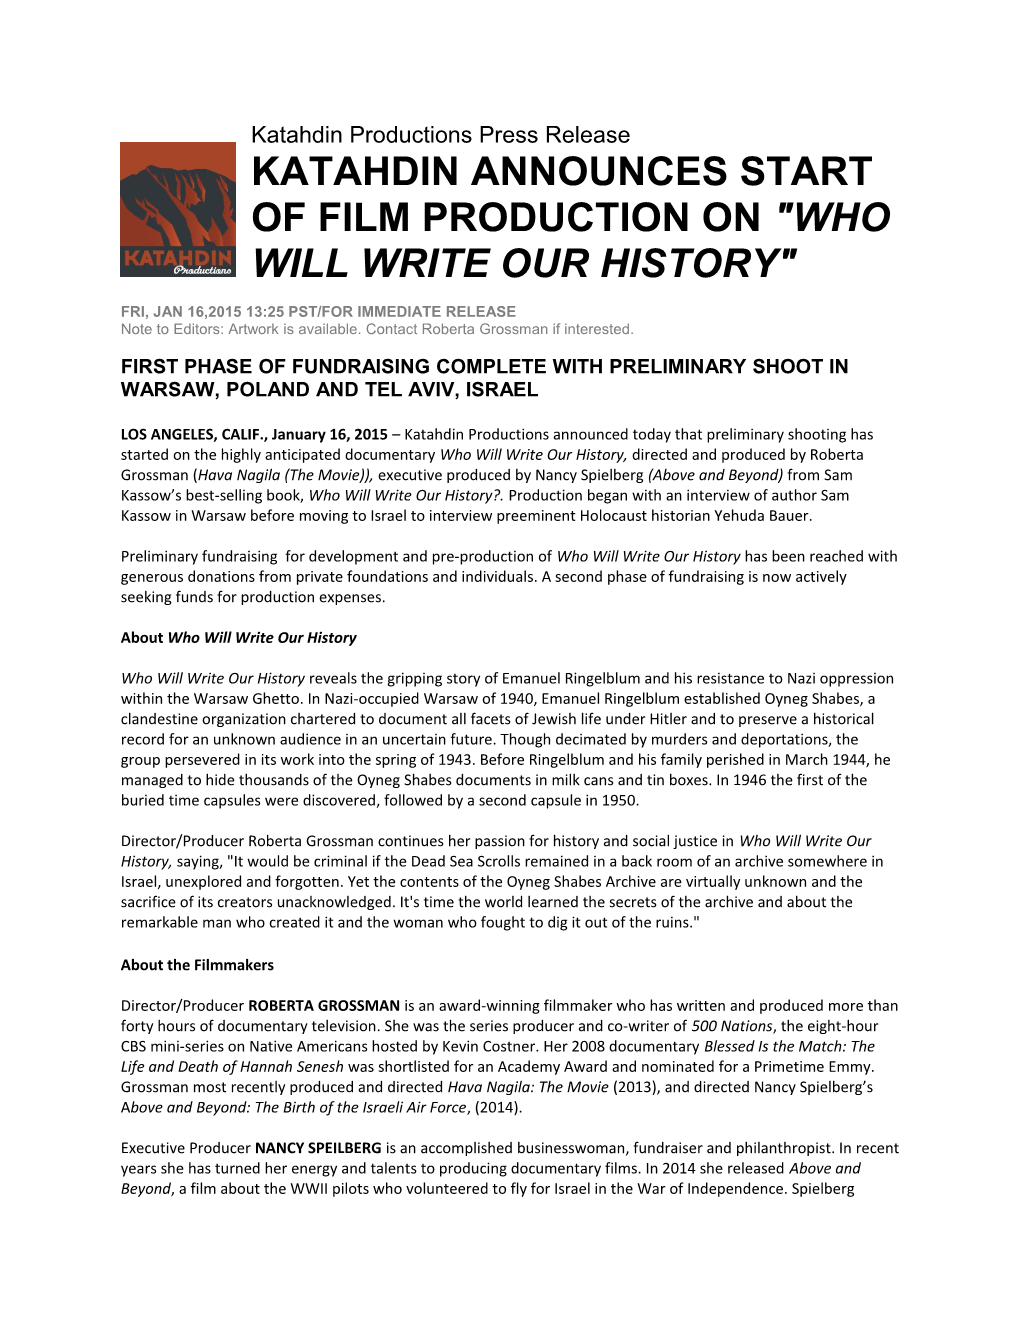 Katahdin Announces Start Offilm Production on Who Will Write Our History